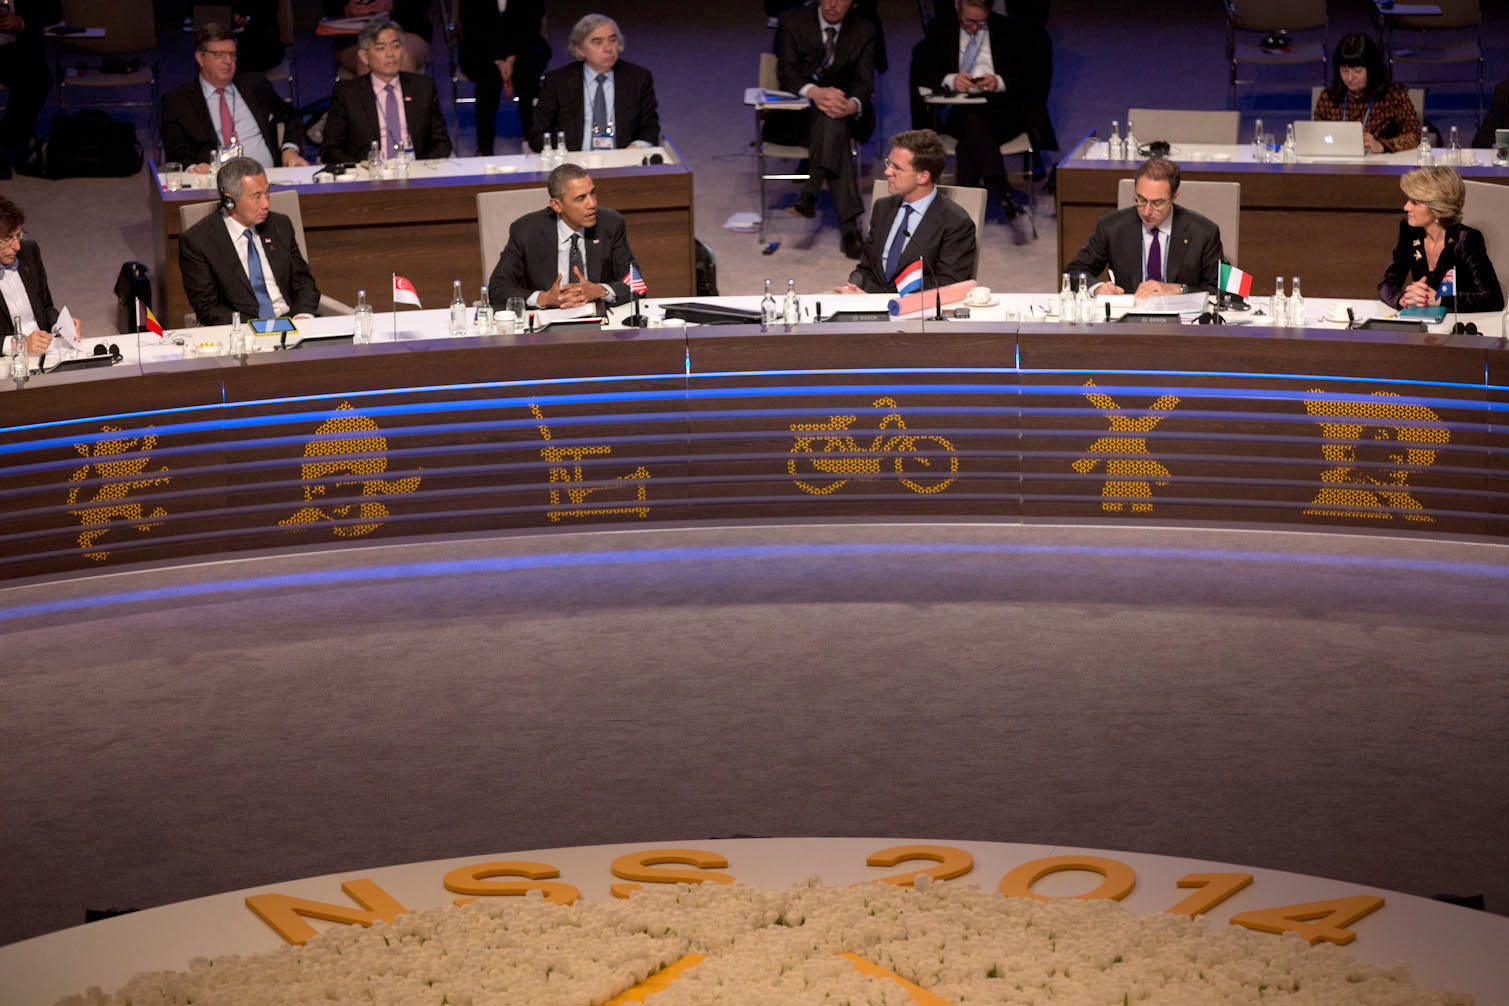 President Barack Obama participates in a third plenary session during the 2014 Nuclear Security Summit at the World Forum, The Hague, the Netherlands